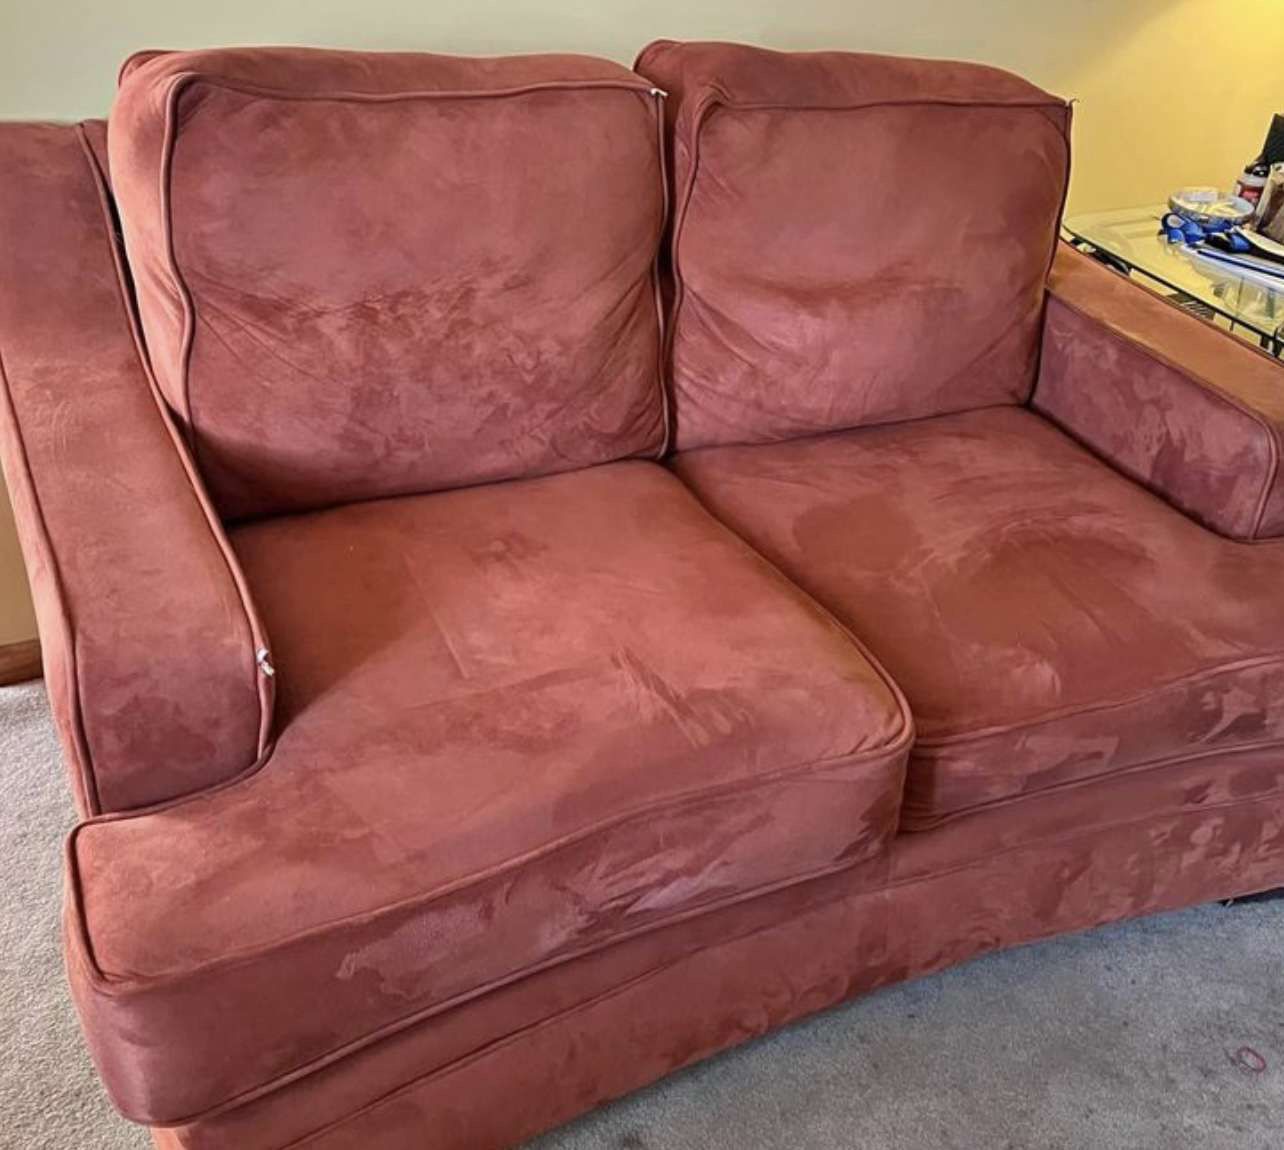 Couch + Free shipping